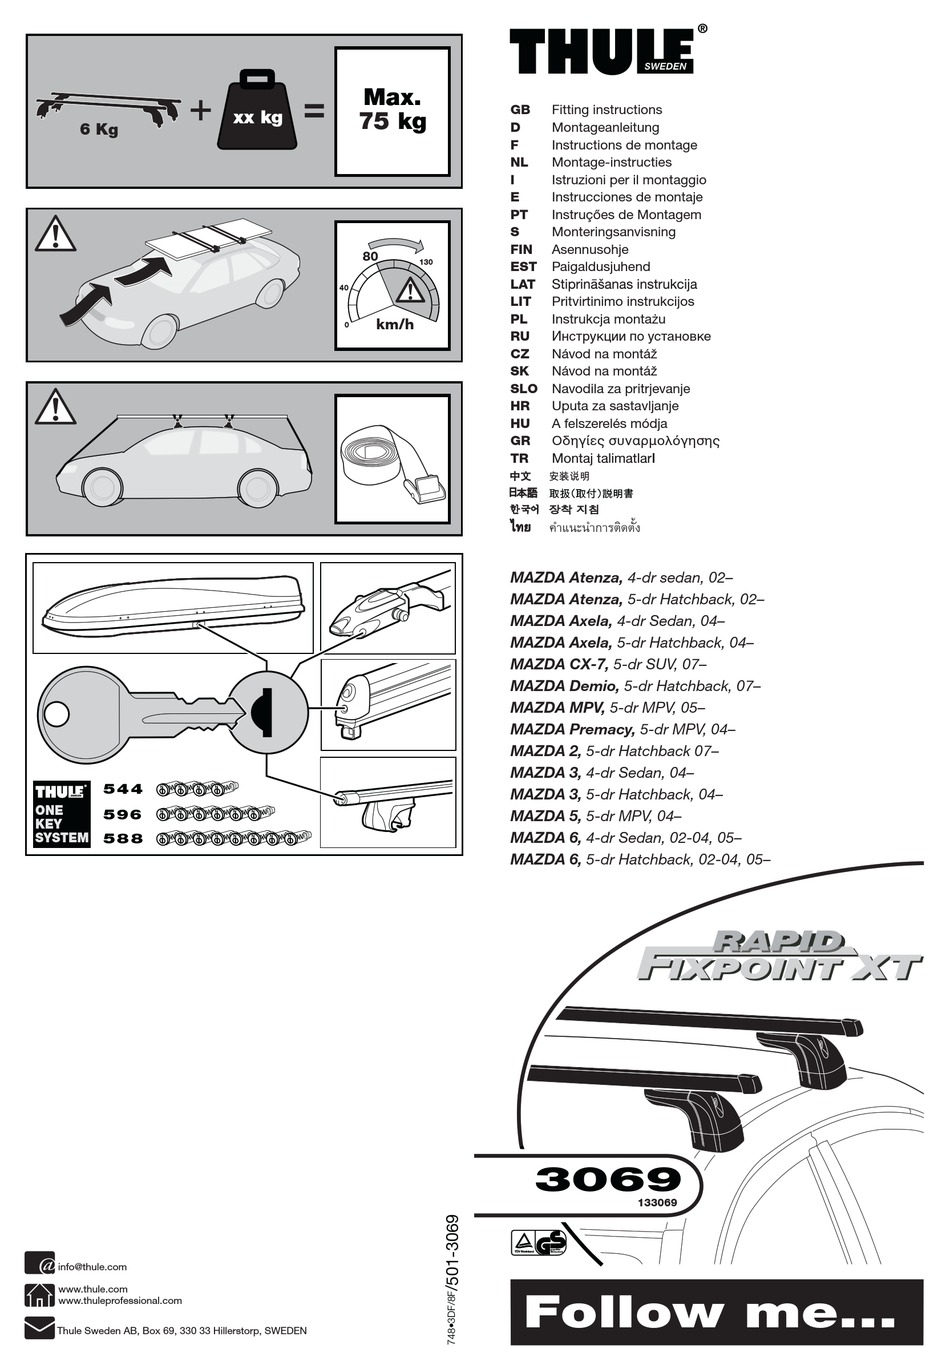 THULE 3069 FITTING INSTRUCTIONS MANUAL Pdf Download